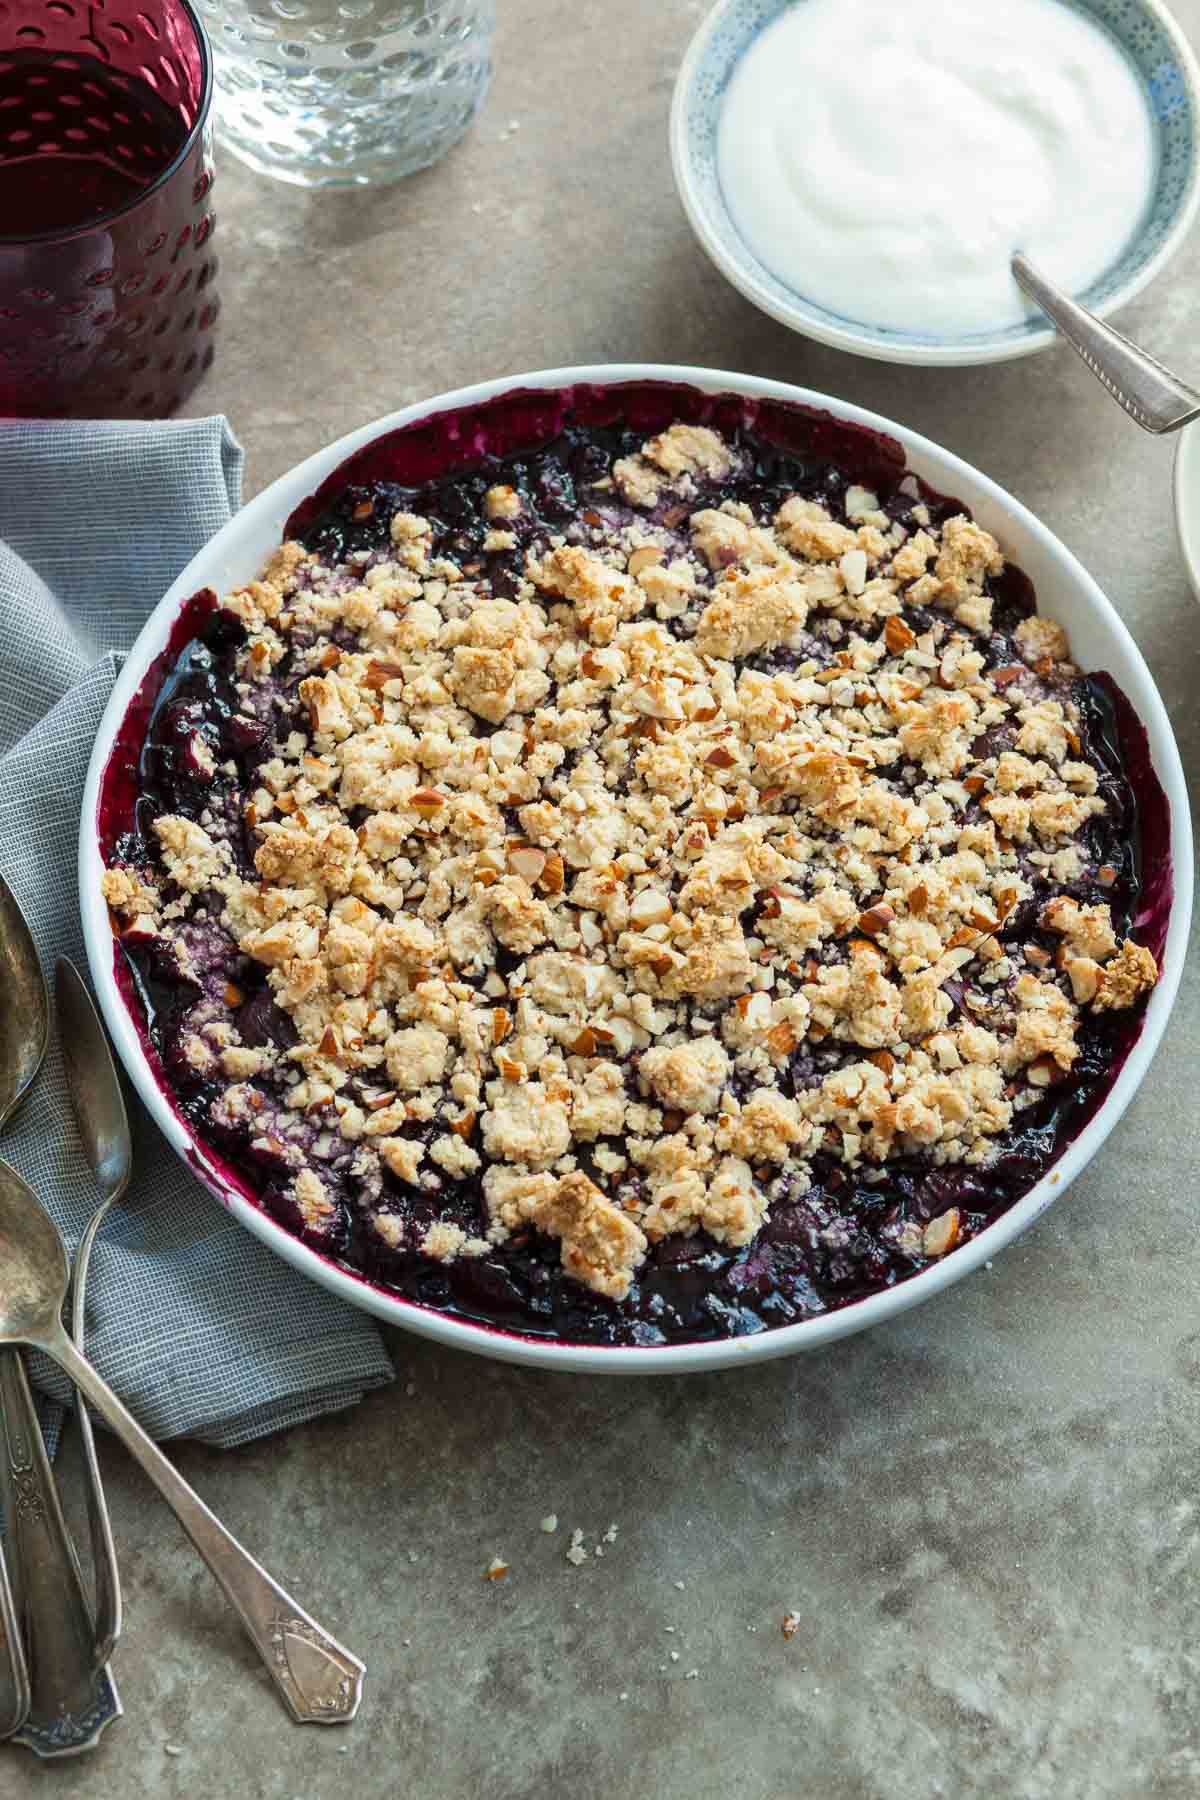 Cherry Crumble in Dish on Table